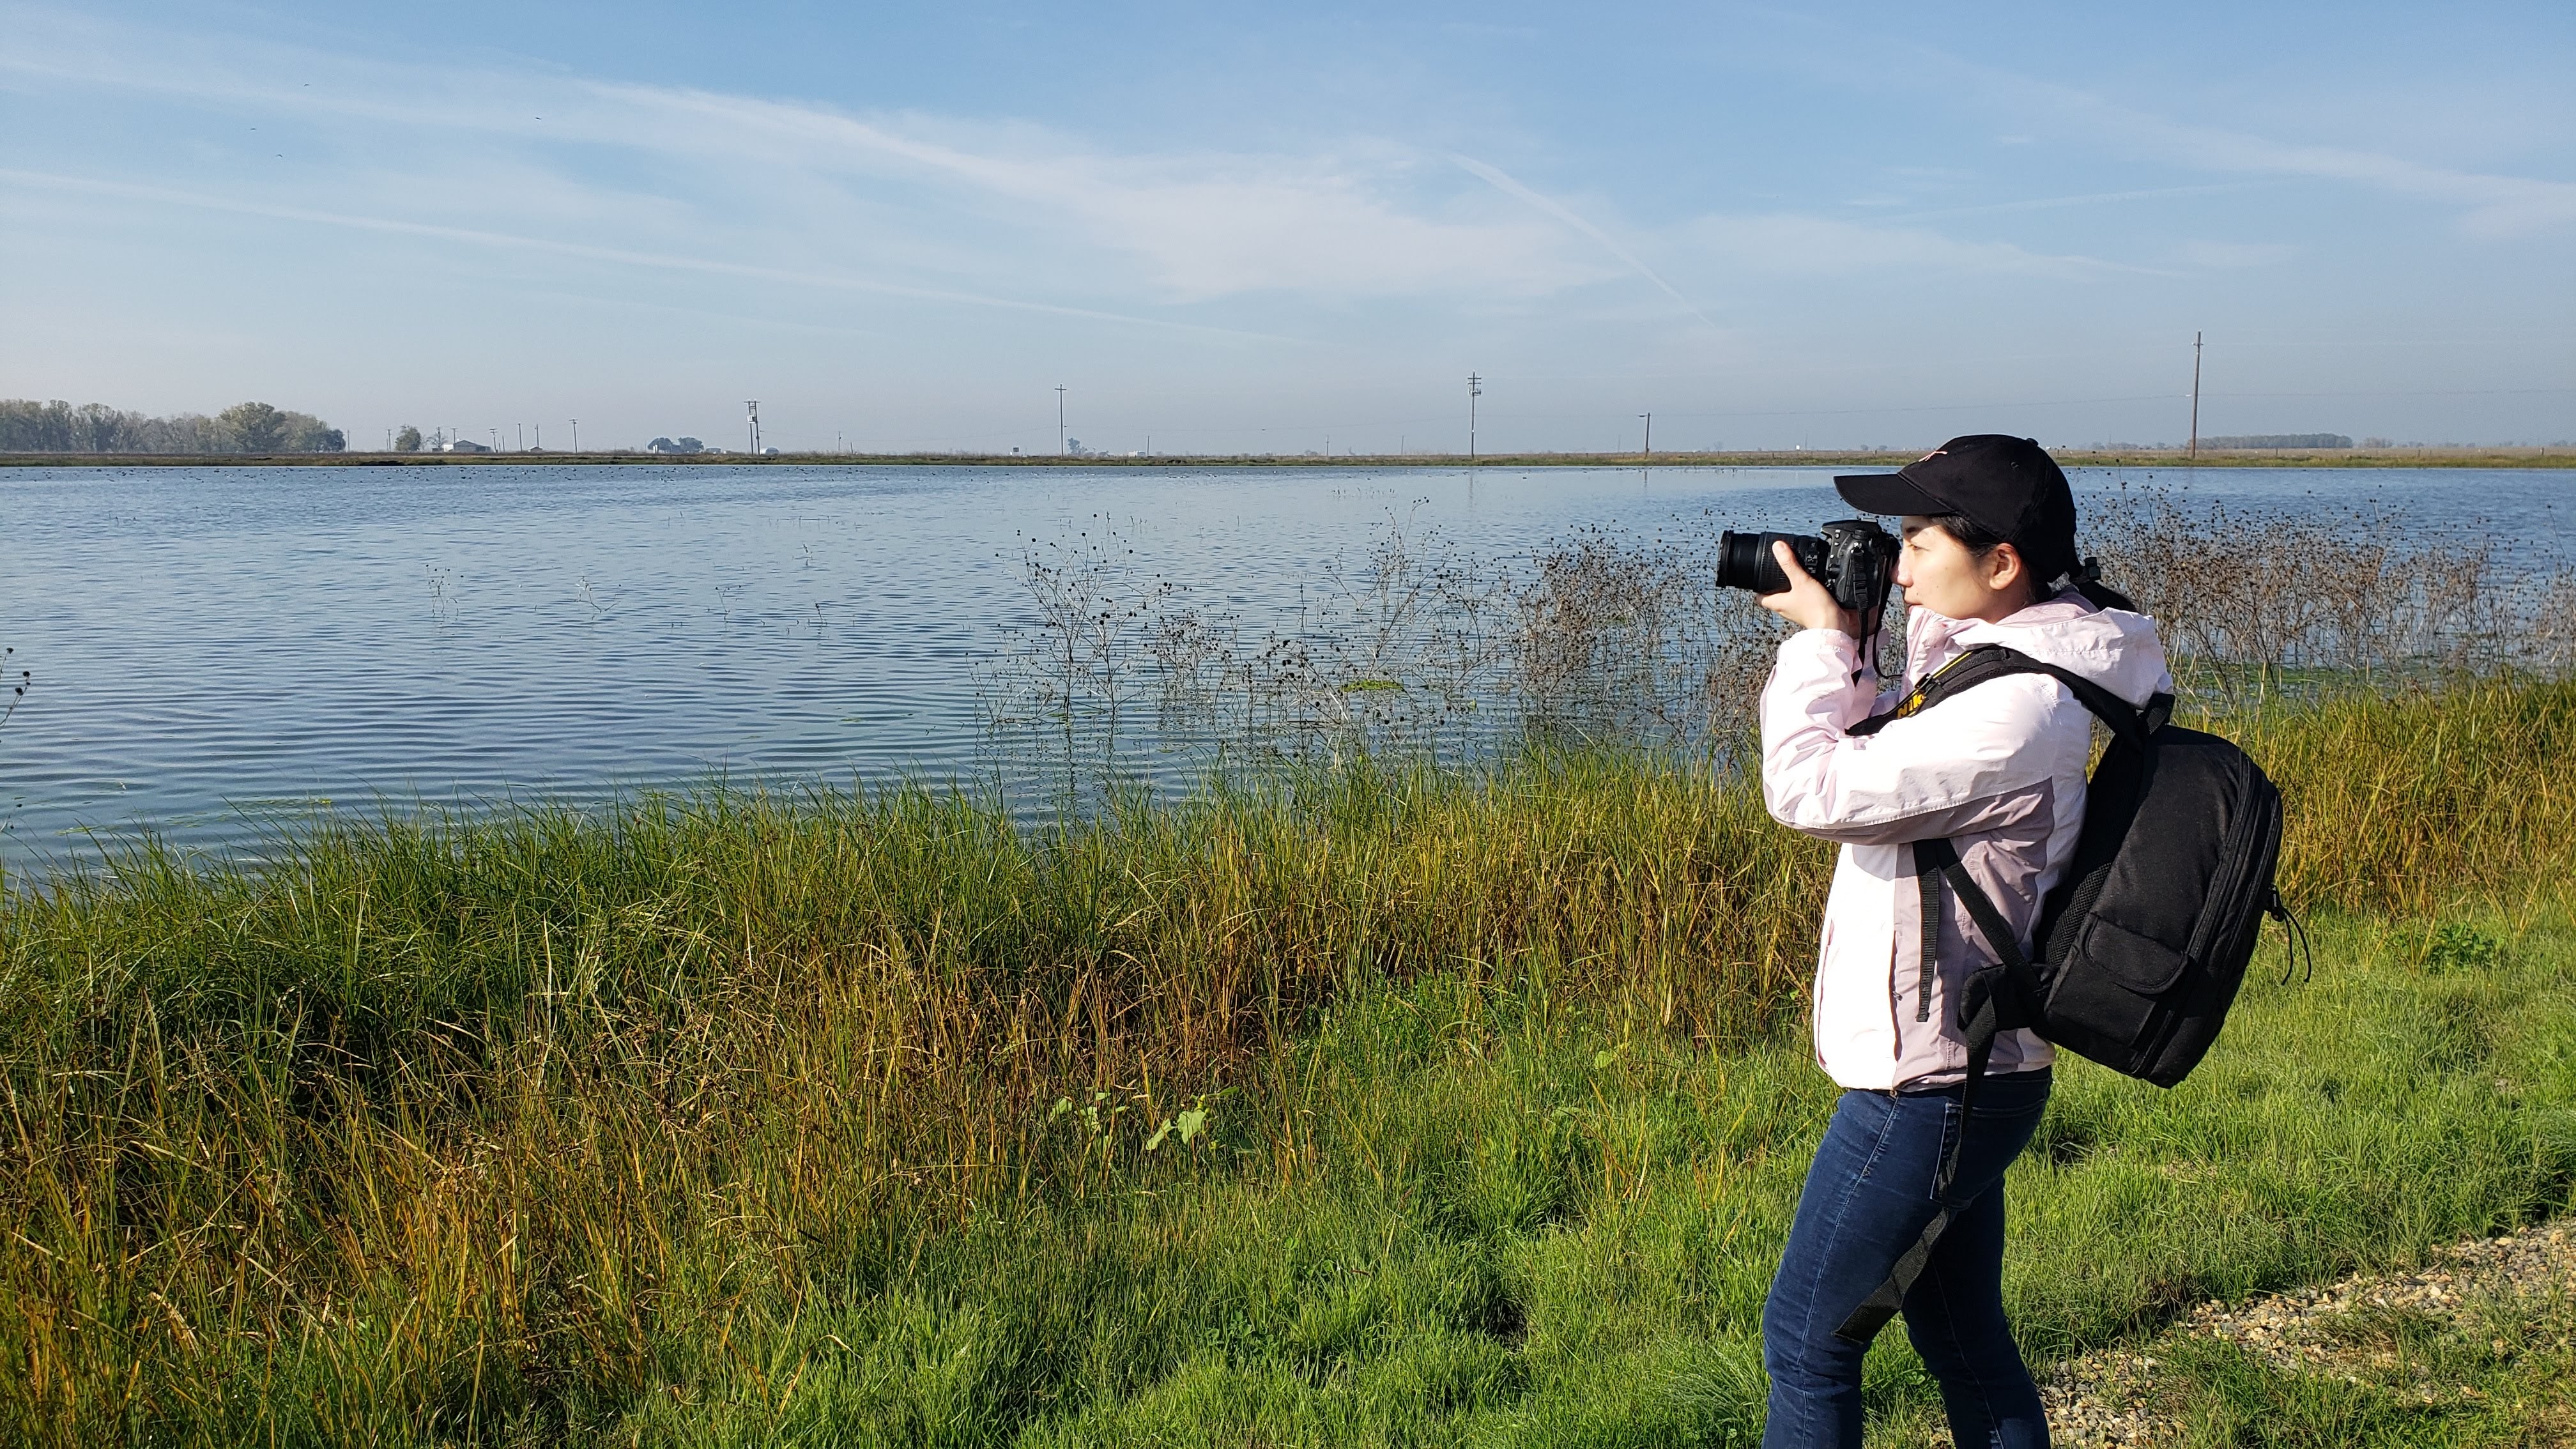 Qin Fan photographing wildlife at the Merced National Wildlife Refuge.